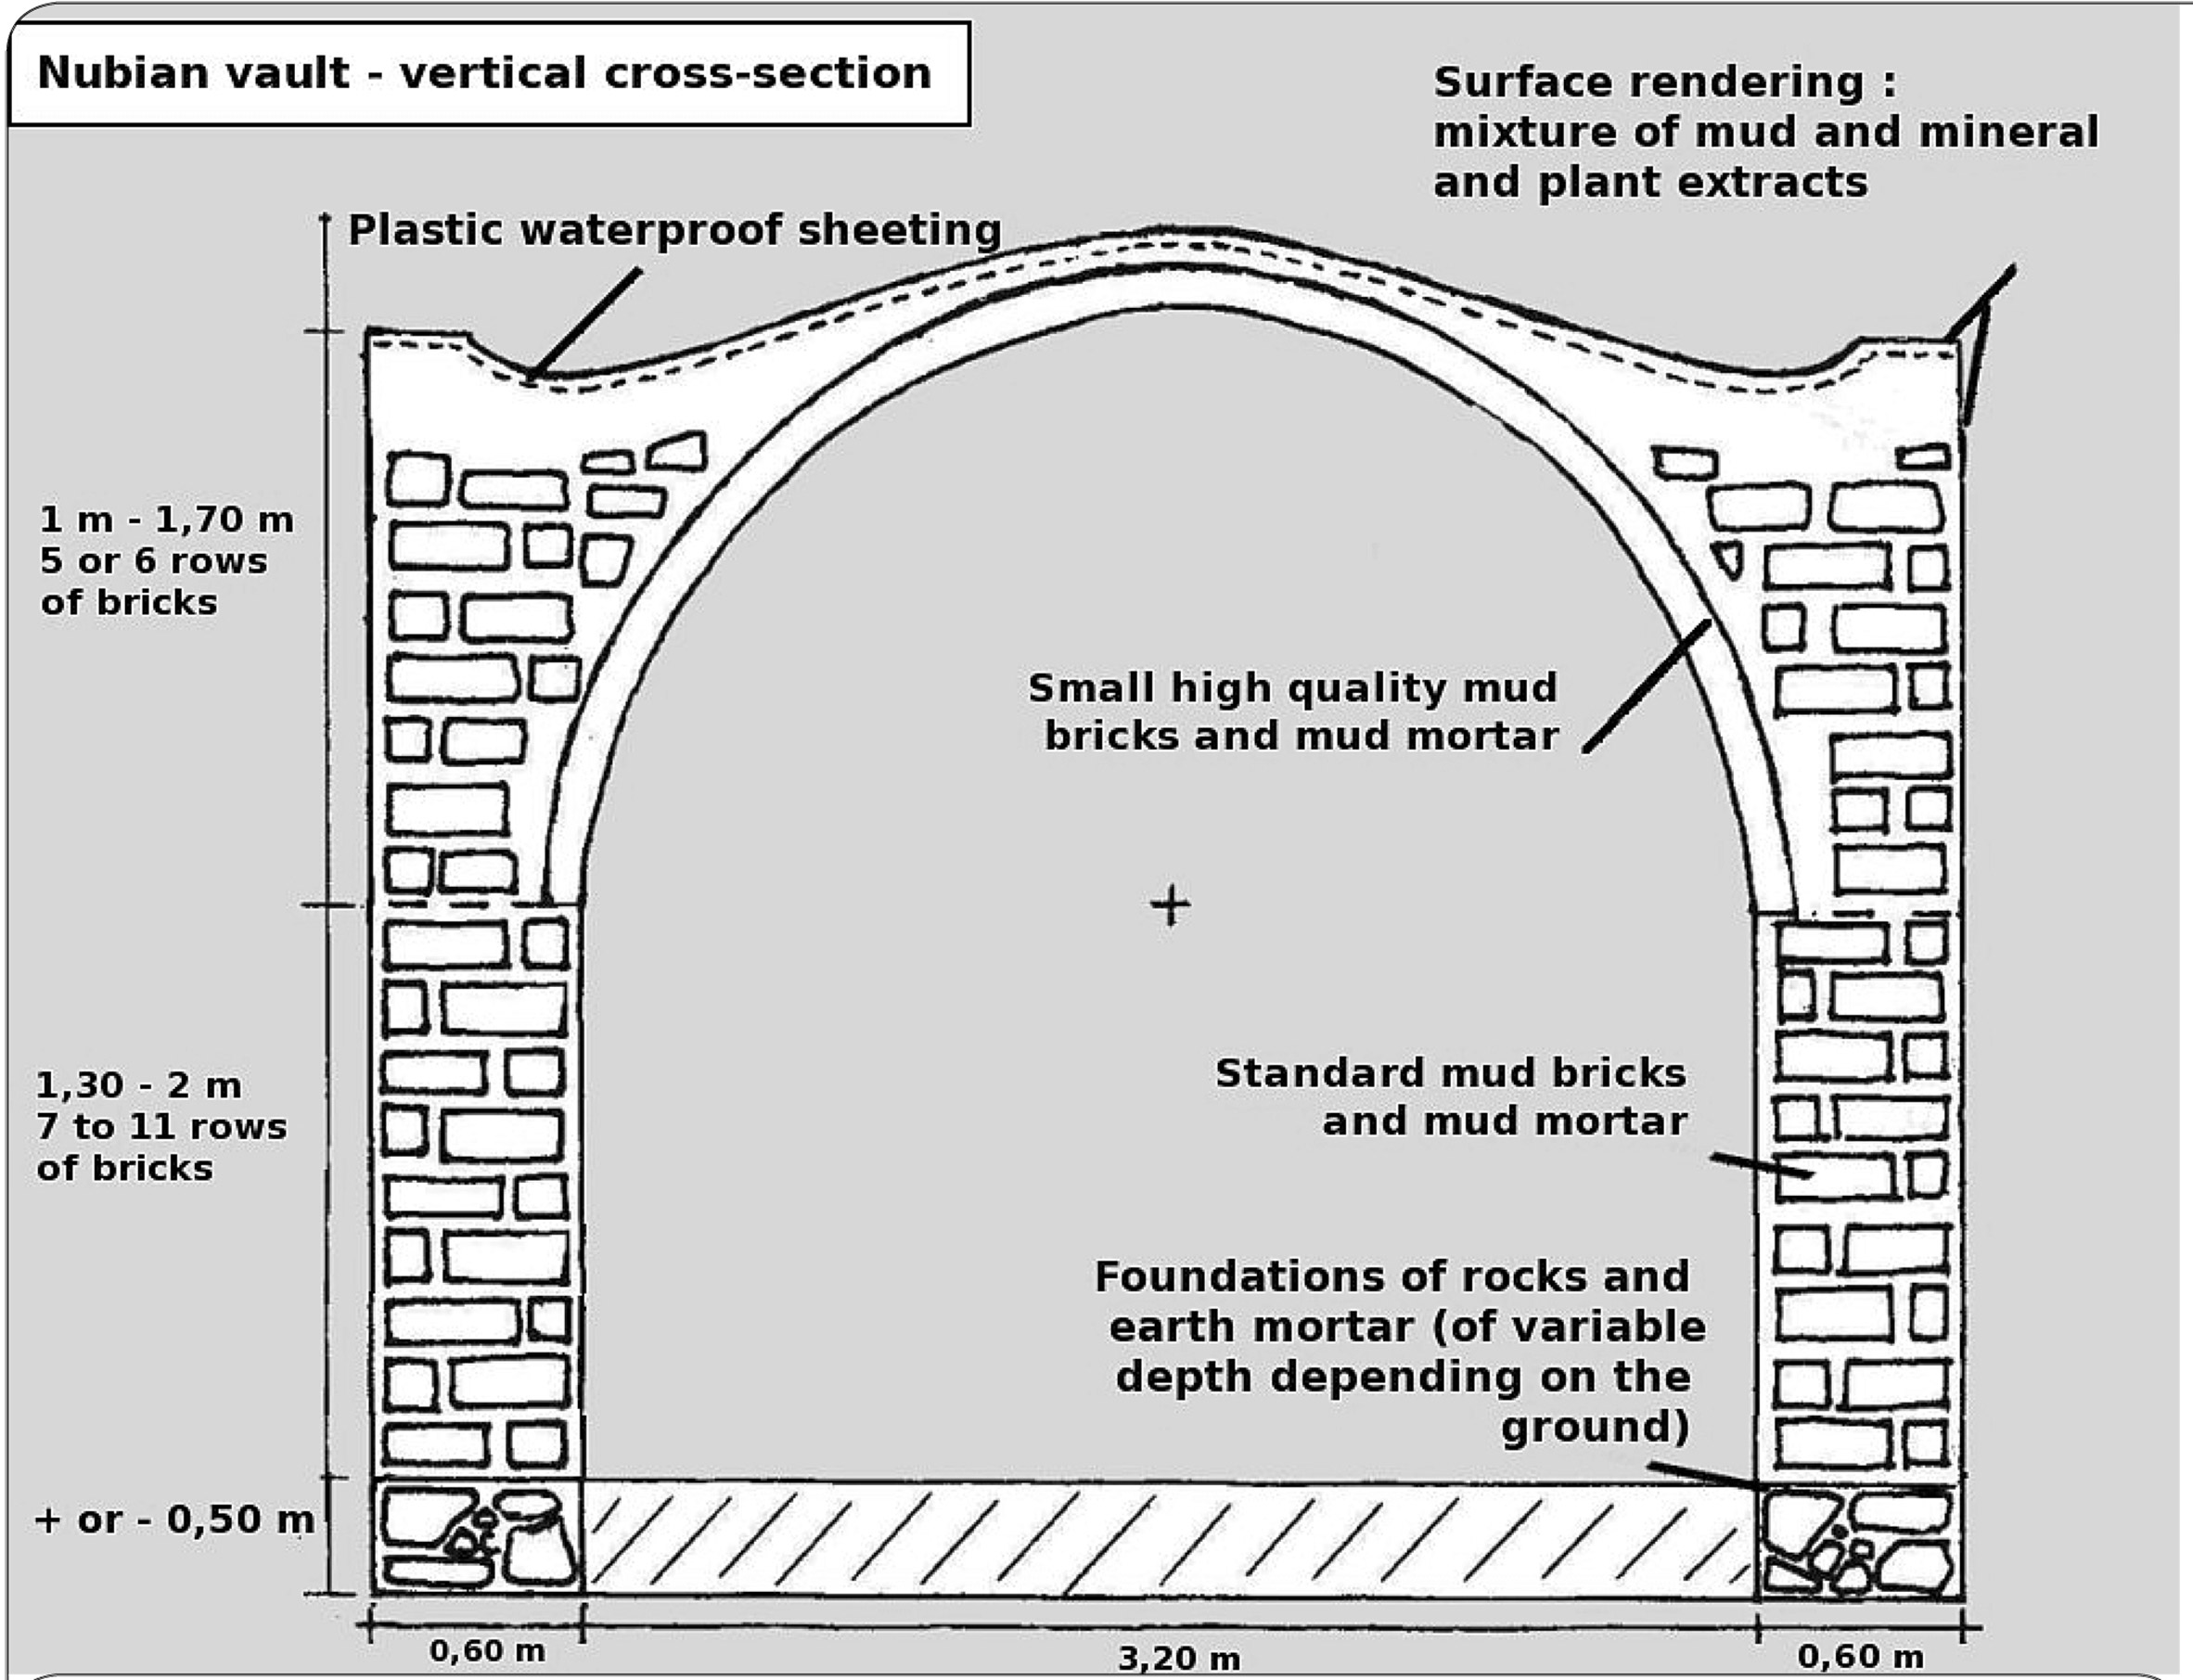 Diagram showing a cross-section of Nubian Vault